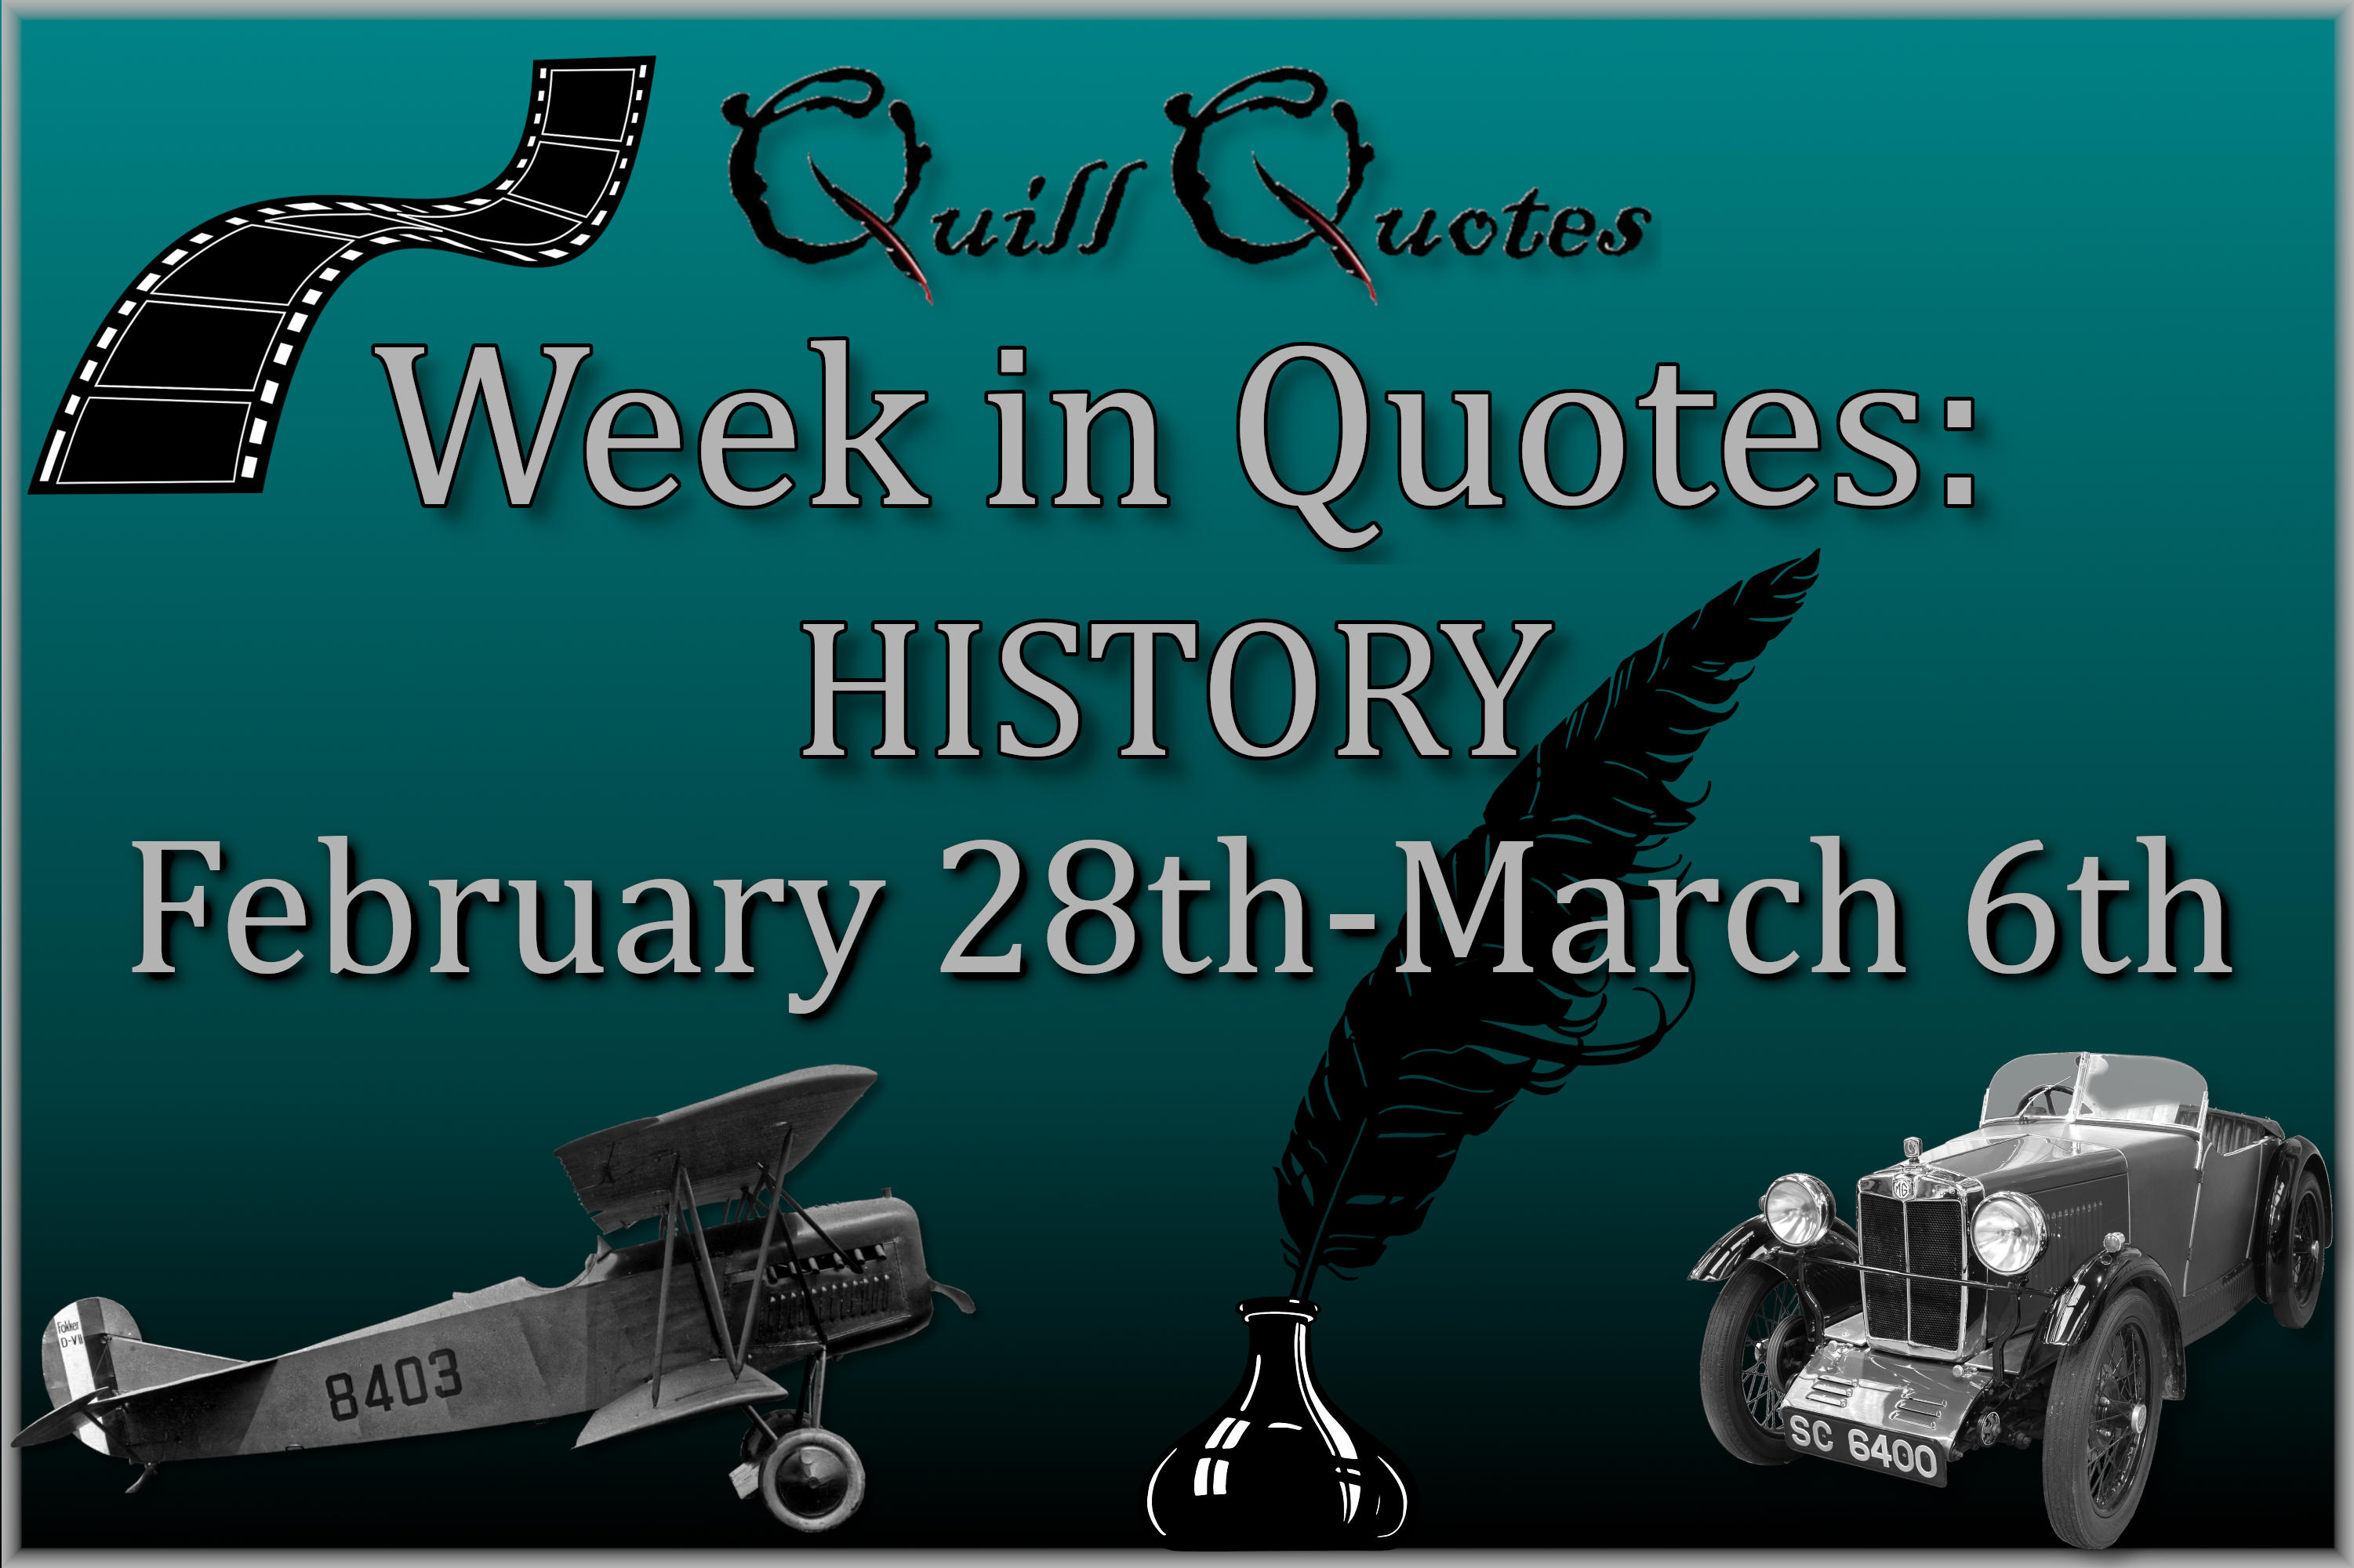 Week in Quotes: HISTORY February 28th-March 6th